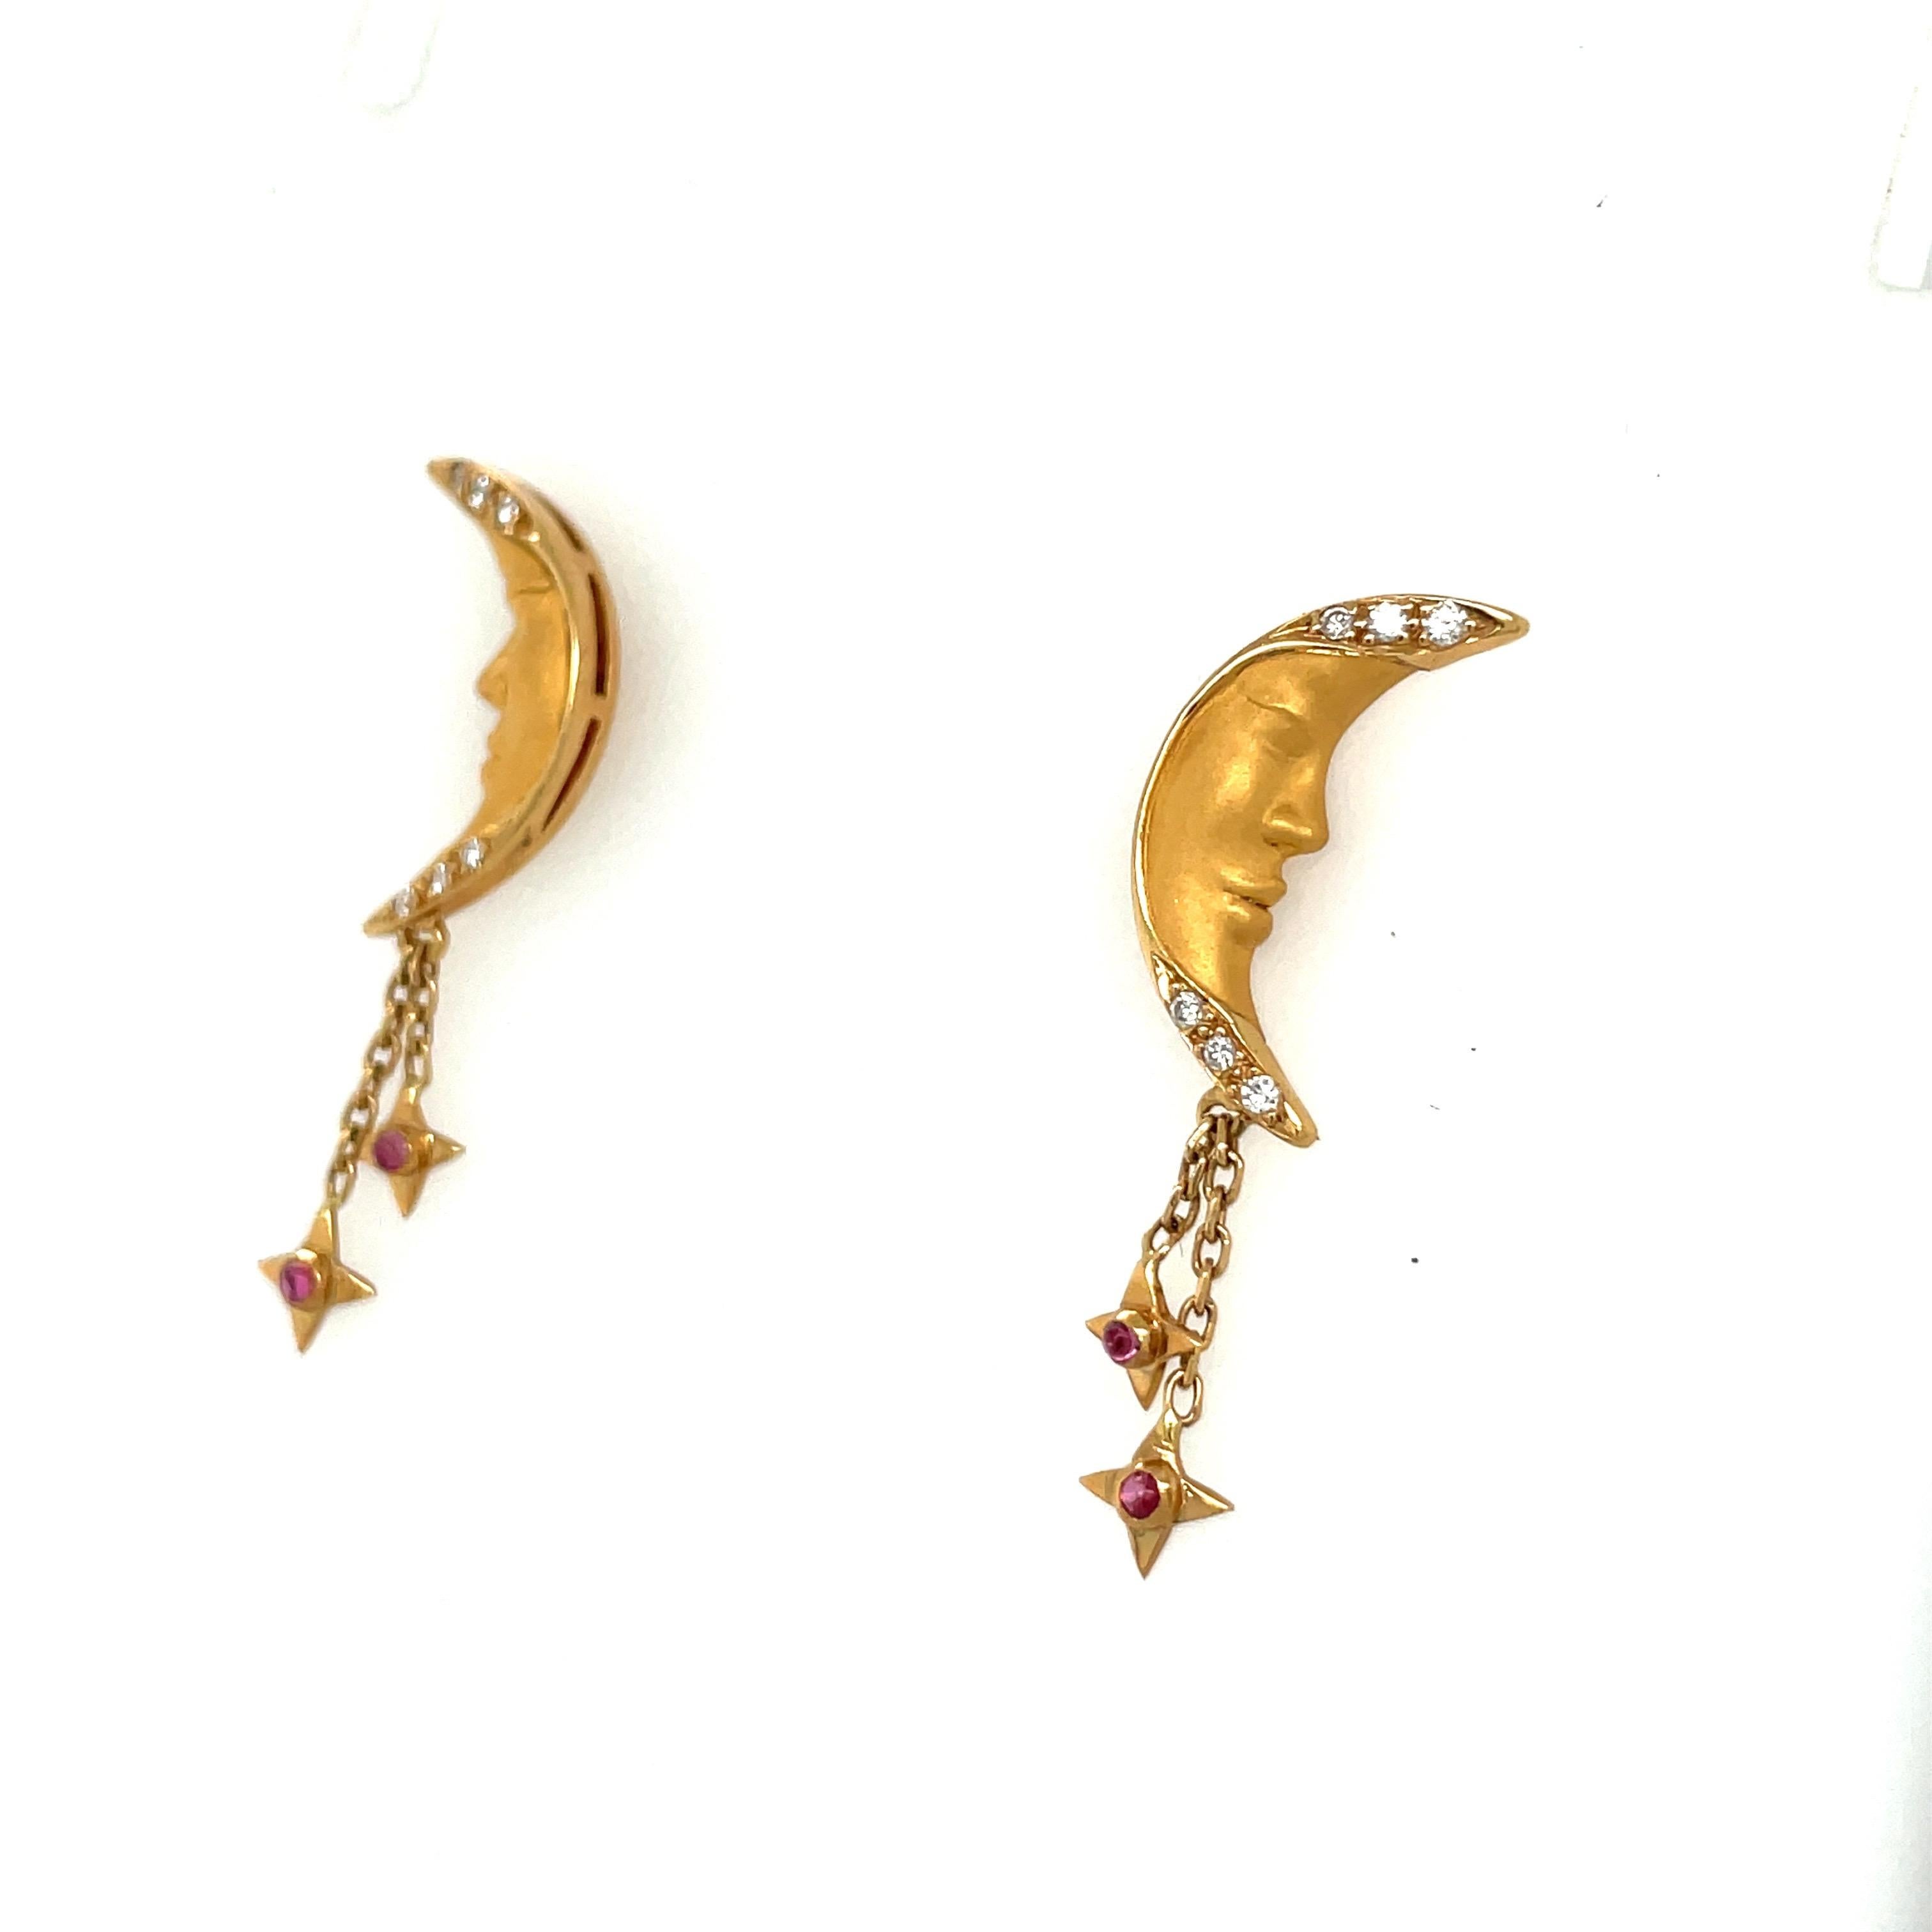 Cabochon Carrera Y Carrera 18KT Yellow Gold Crescent Moon Earrings with Diamond & Ruby